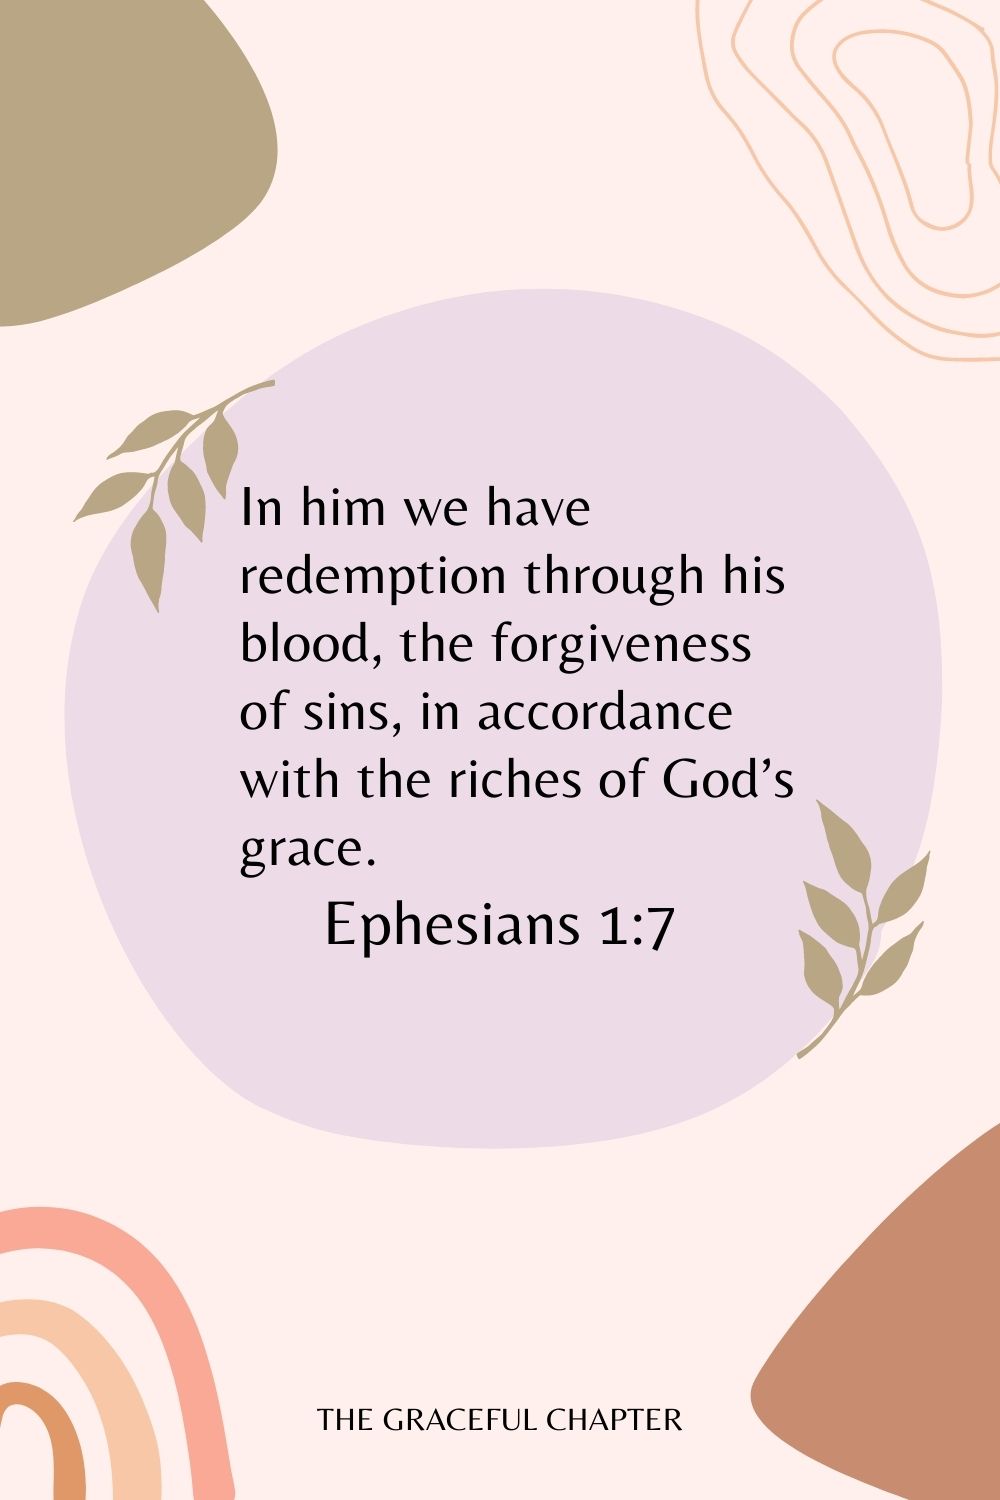 In him we have redemption through his blood, the forgiveness of sins, in accordance with the riches of God’s grace. Ephesians 1:7